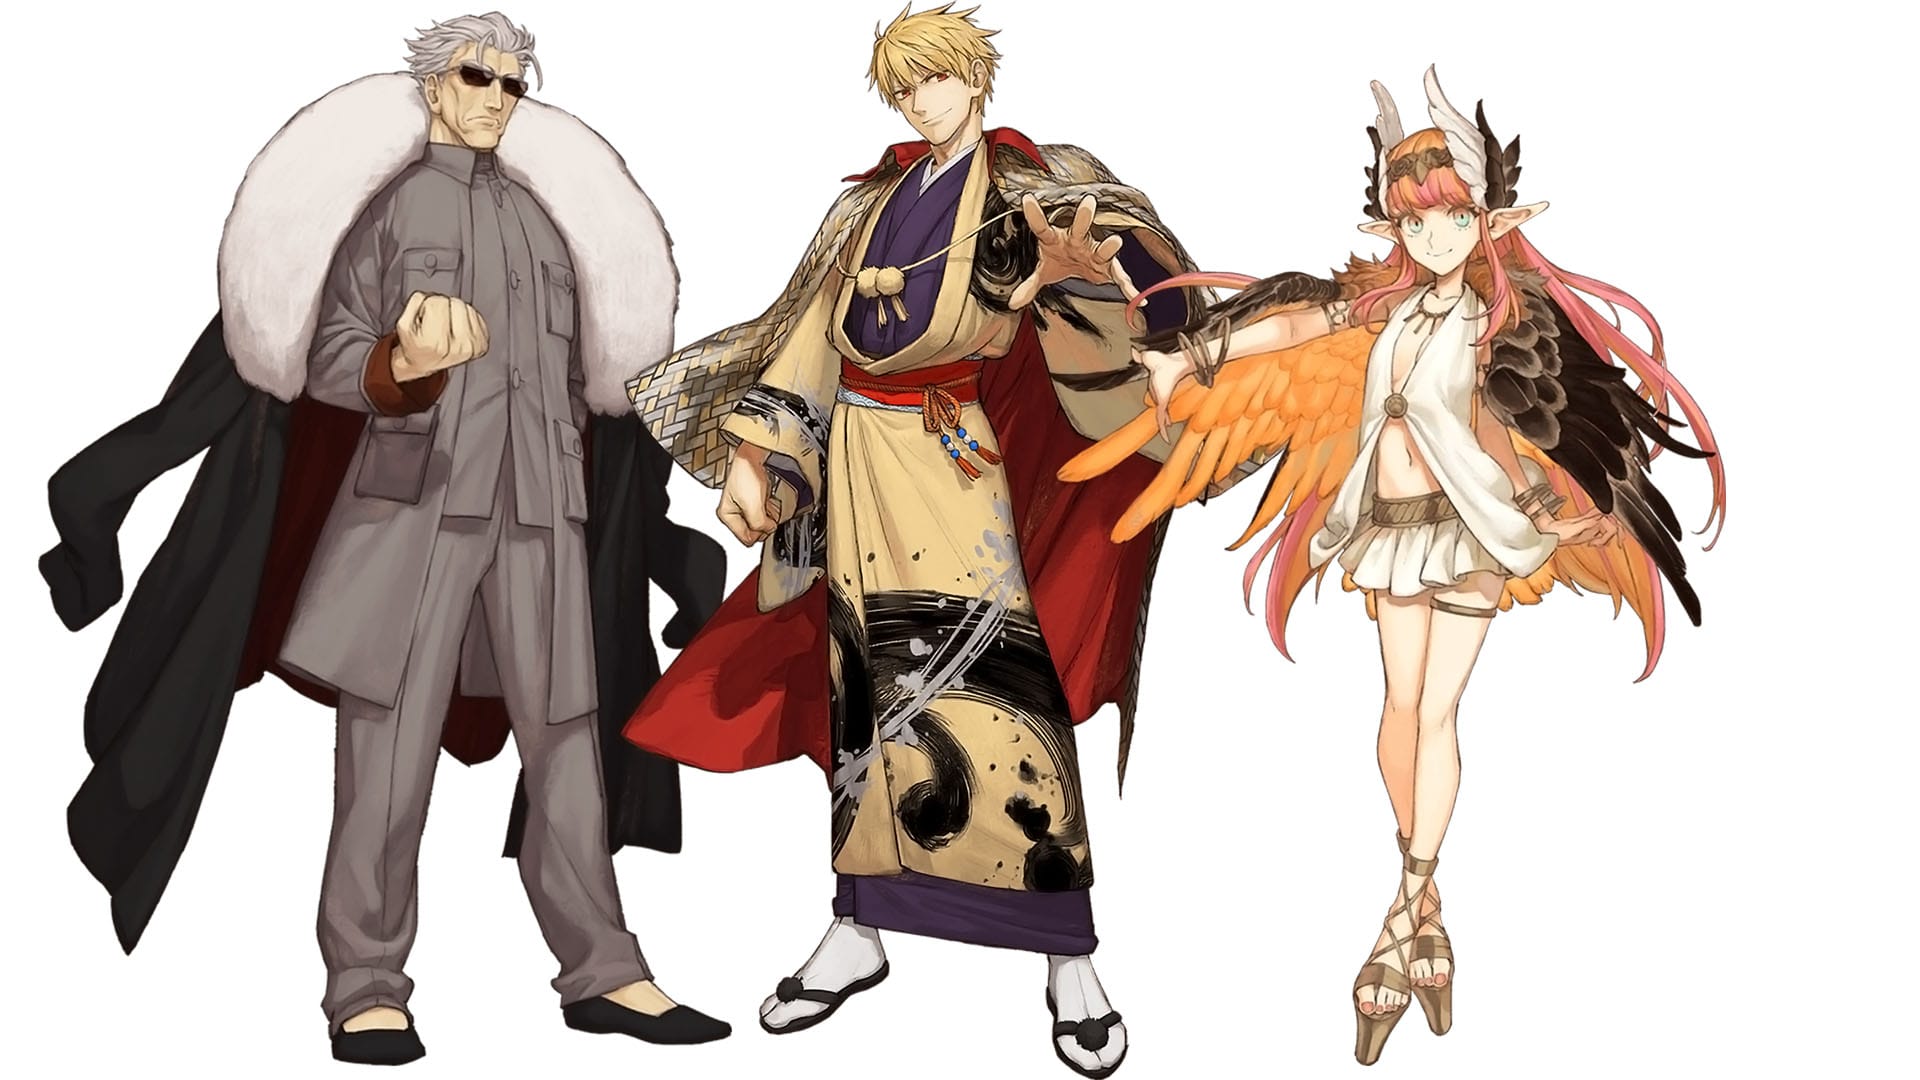 Fate/Samurai Remnant Reveals More Characters With Screenshots & Artwork